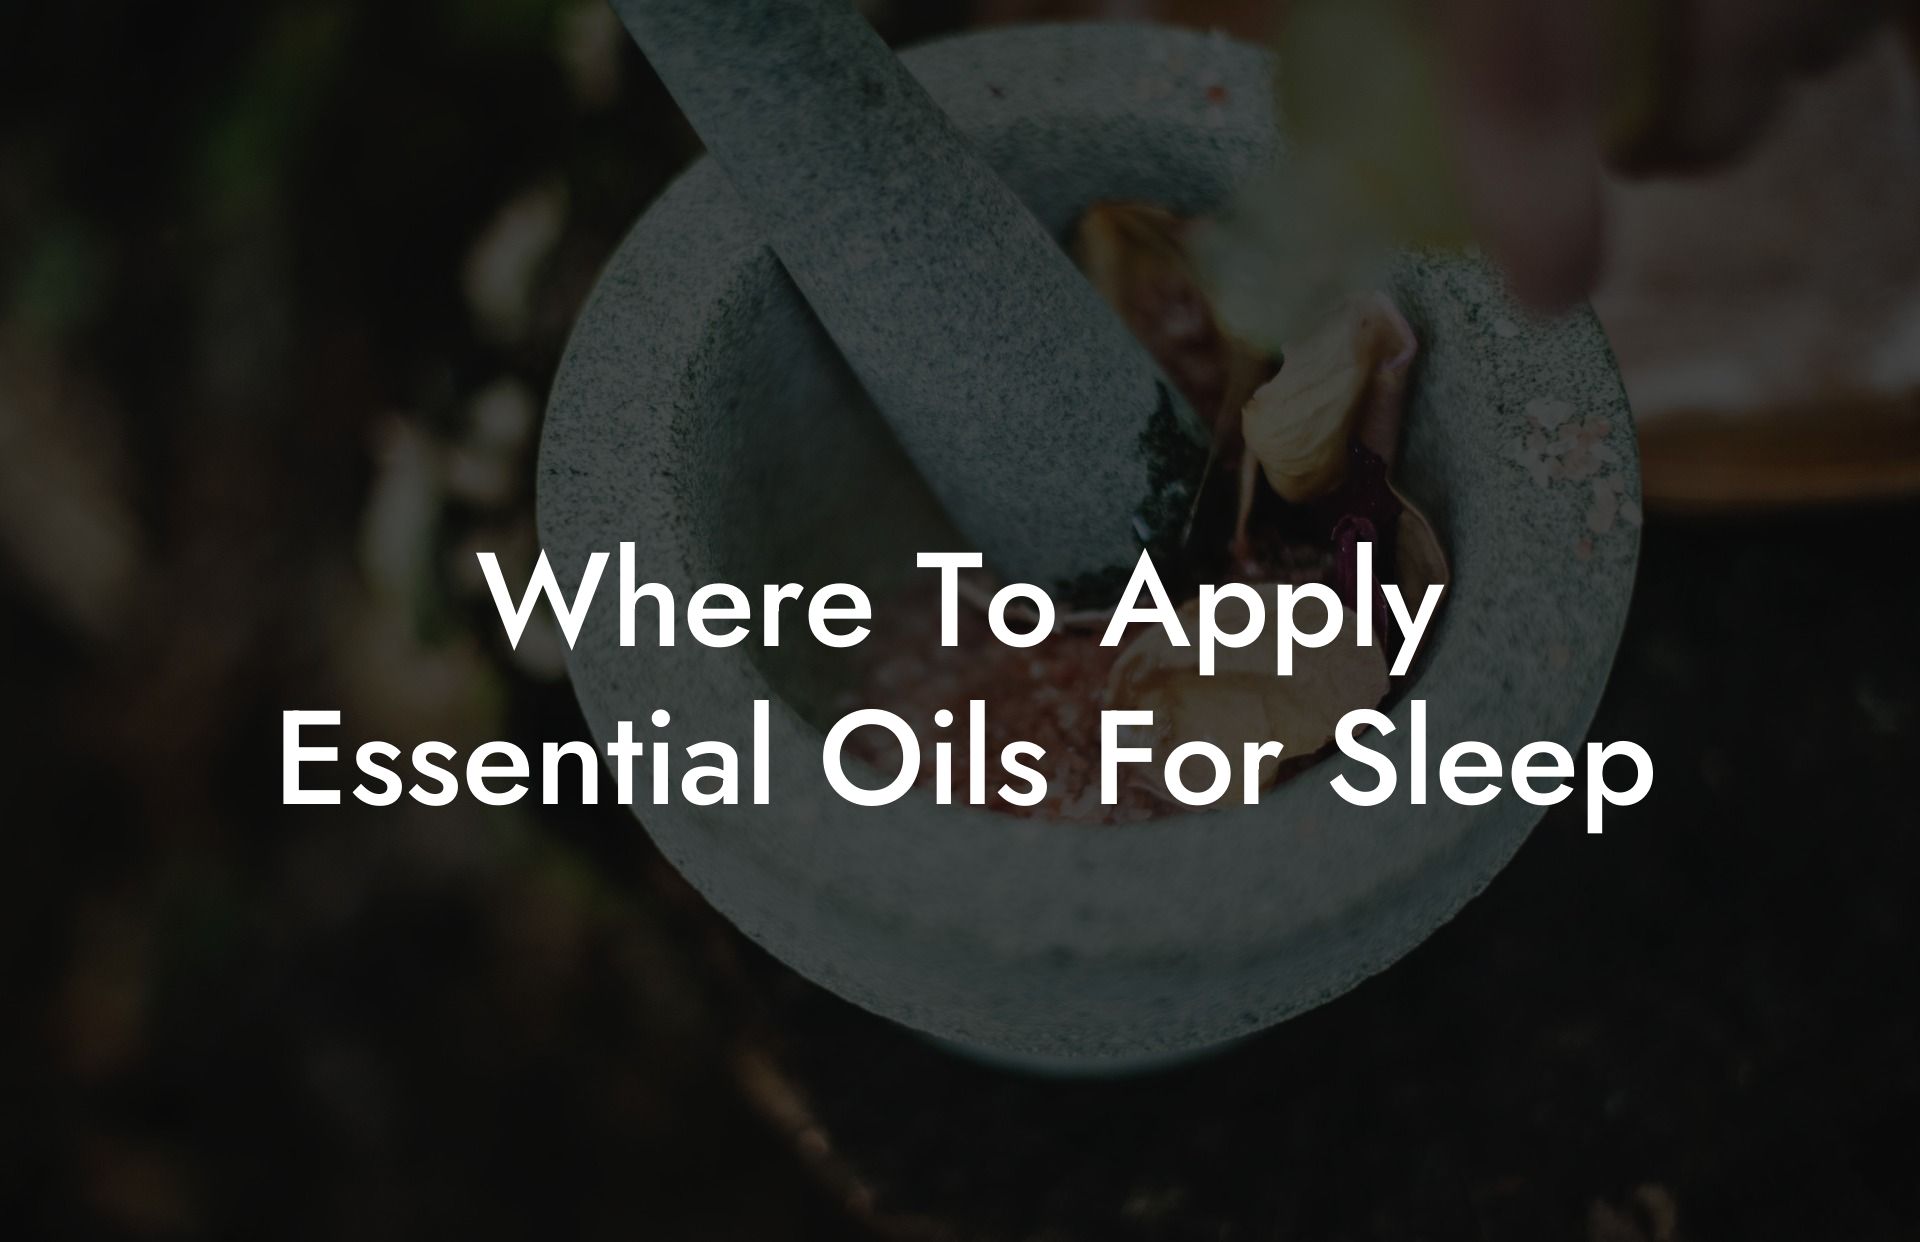 Where To Apply Essential Oils For Sleep